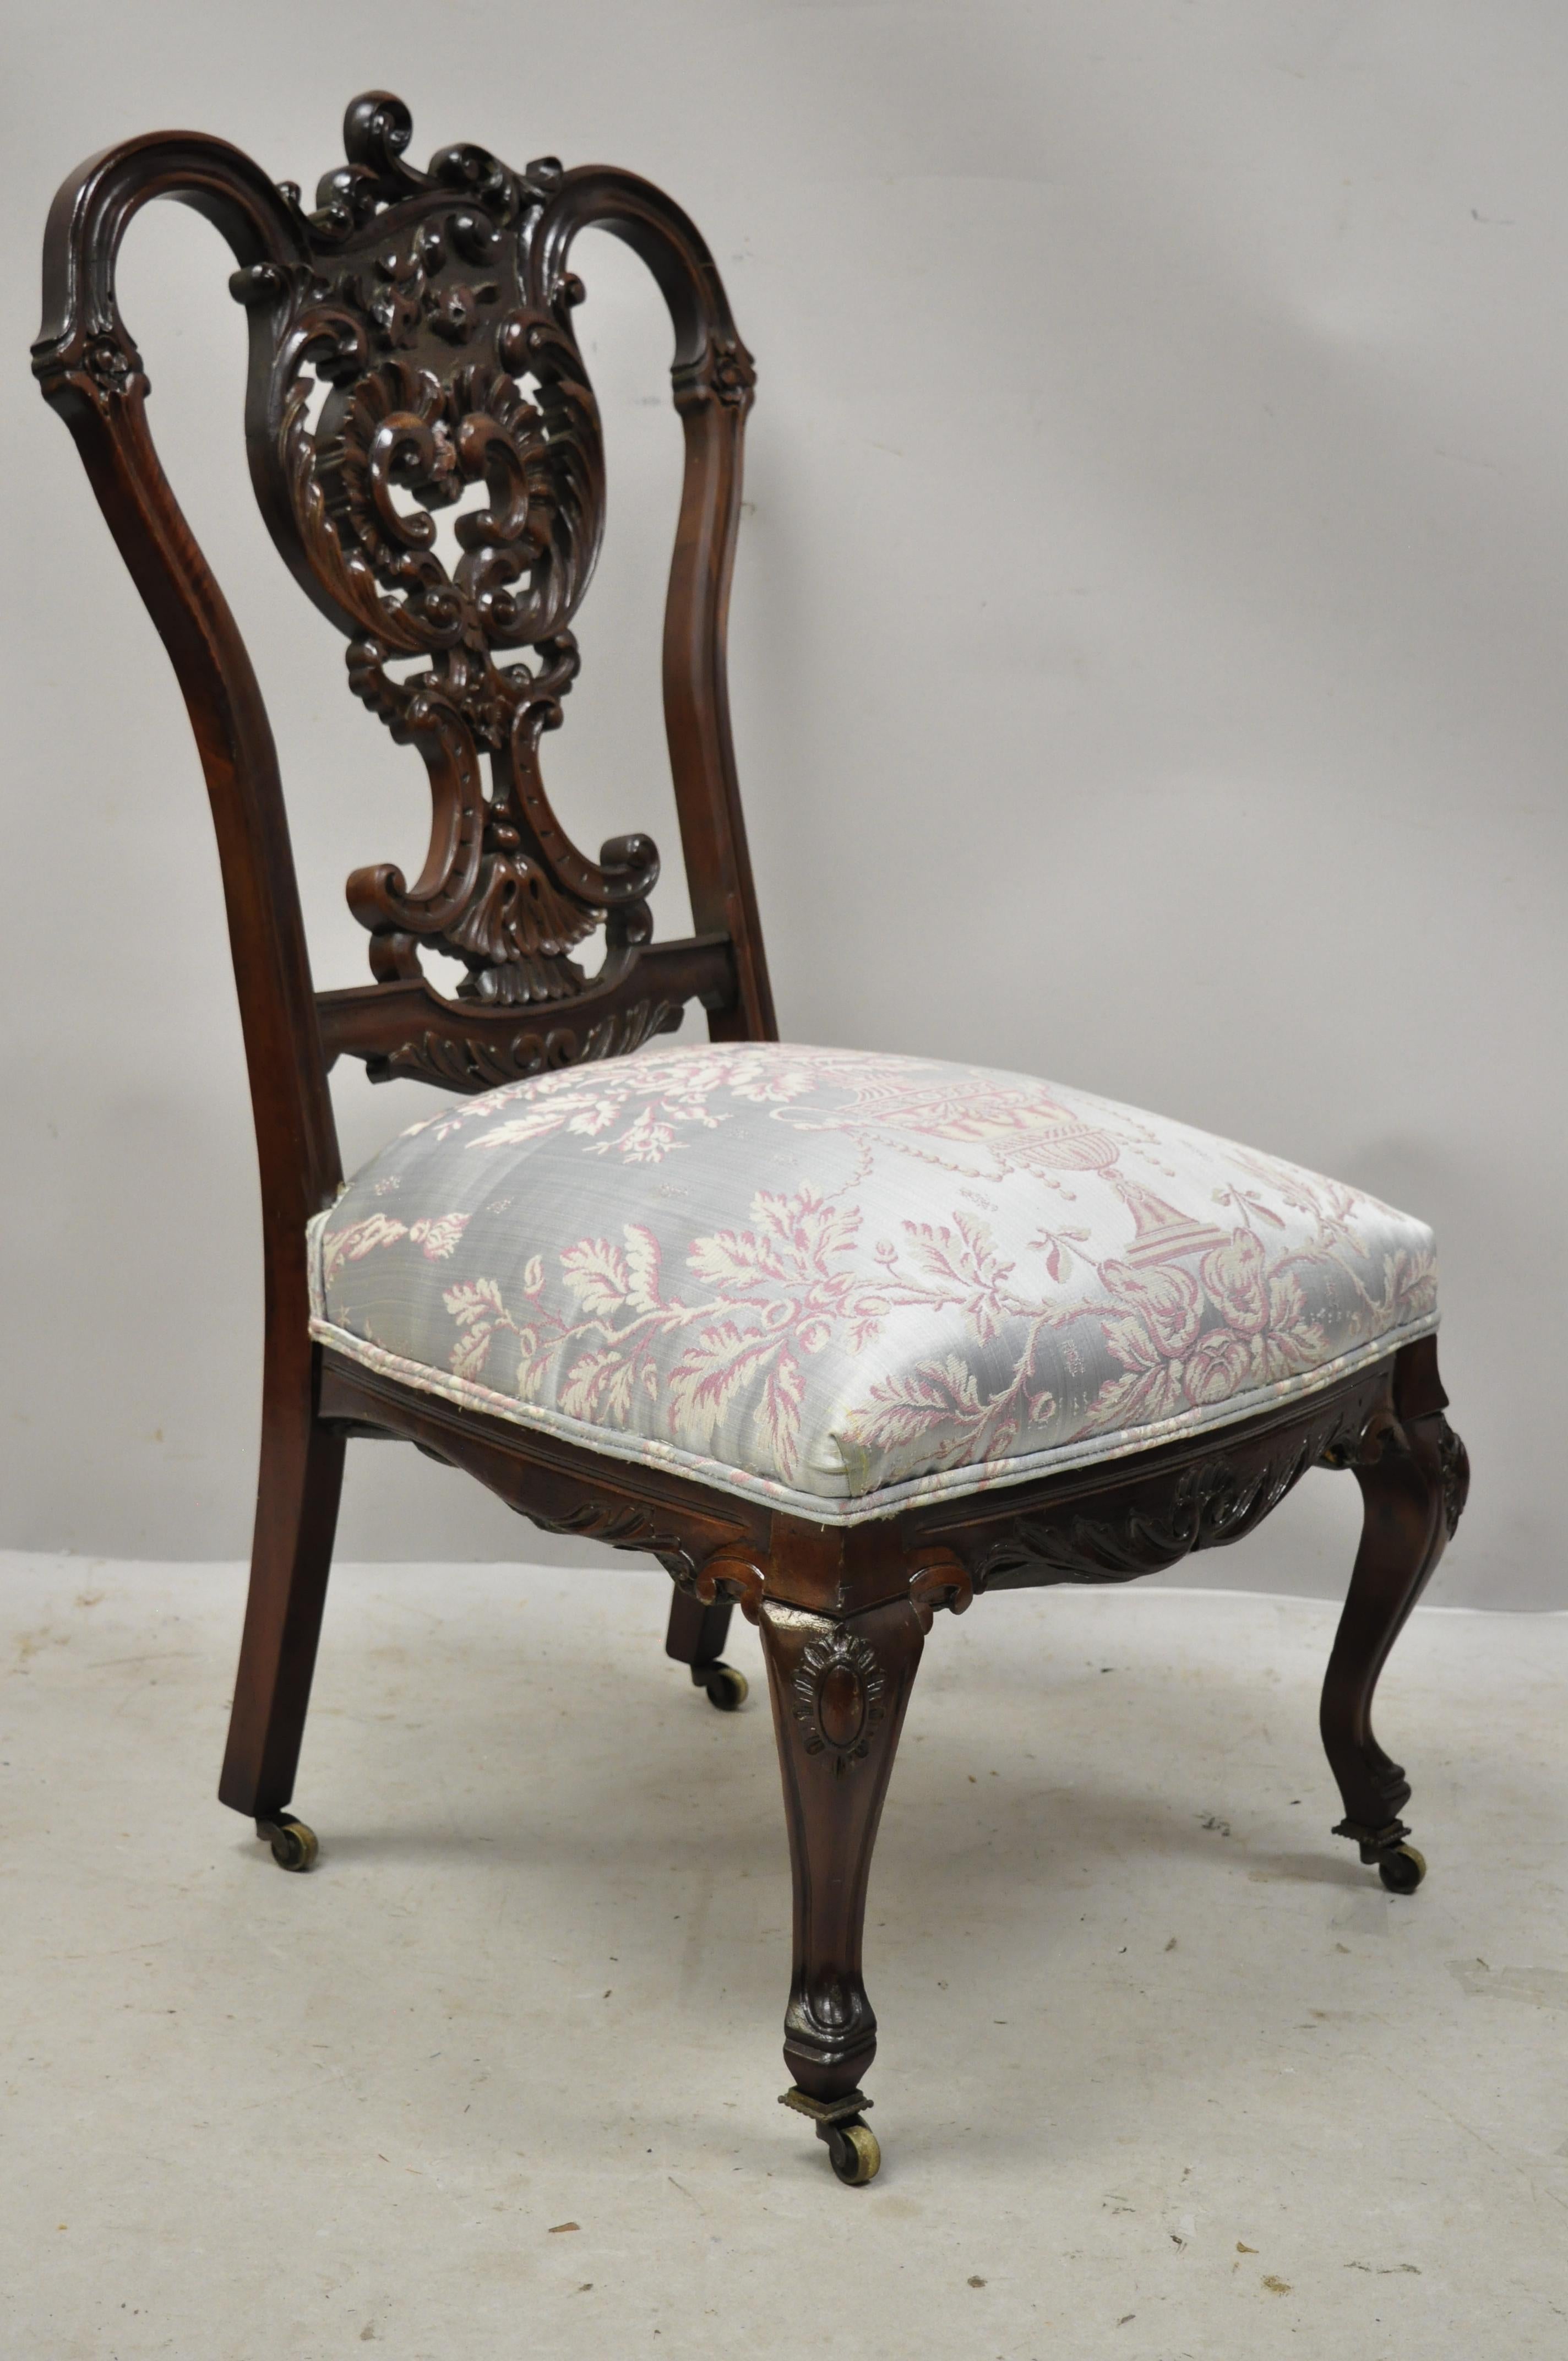 Antique Victorian Floral Scrollwork carved mahogany parlor accent slipper chair. Item features floral scrollwork carved frame, brass rolling casters, very nice antique item. Frame looks to have been refinished at some point over the years, circa